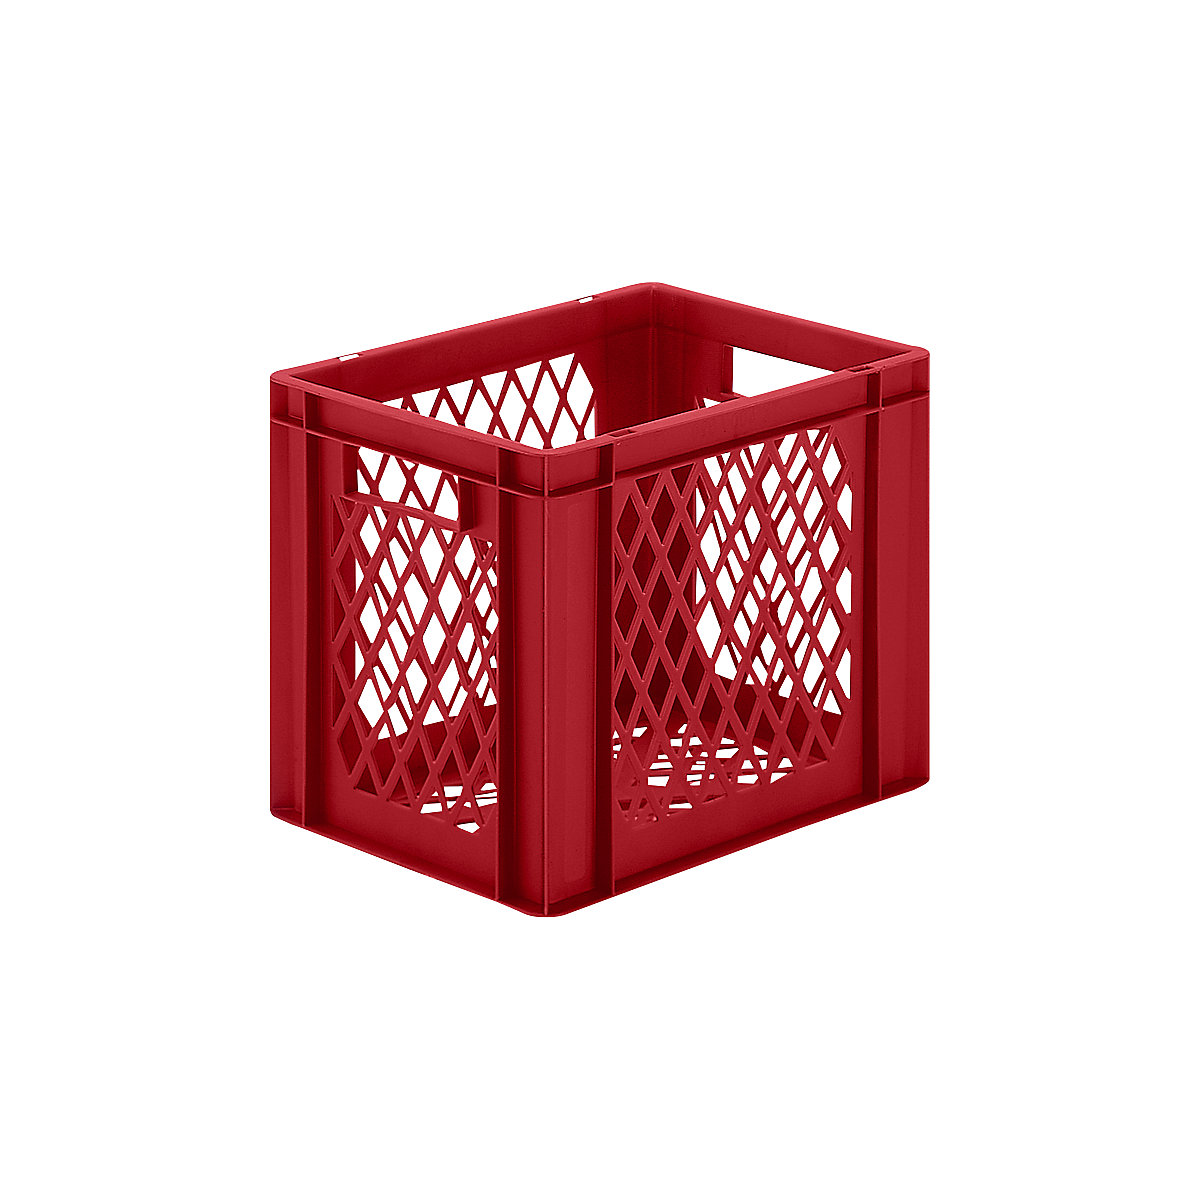 Euro stacking container, perforated walls and base, LxWxH 400 x 300 x 320 mm, red, pack of 5-6